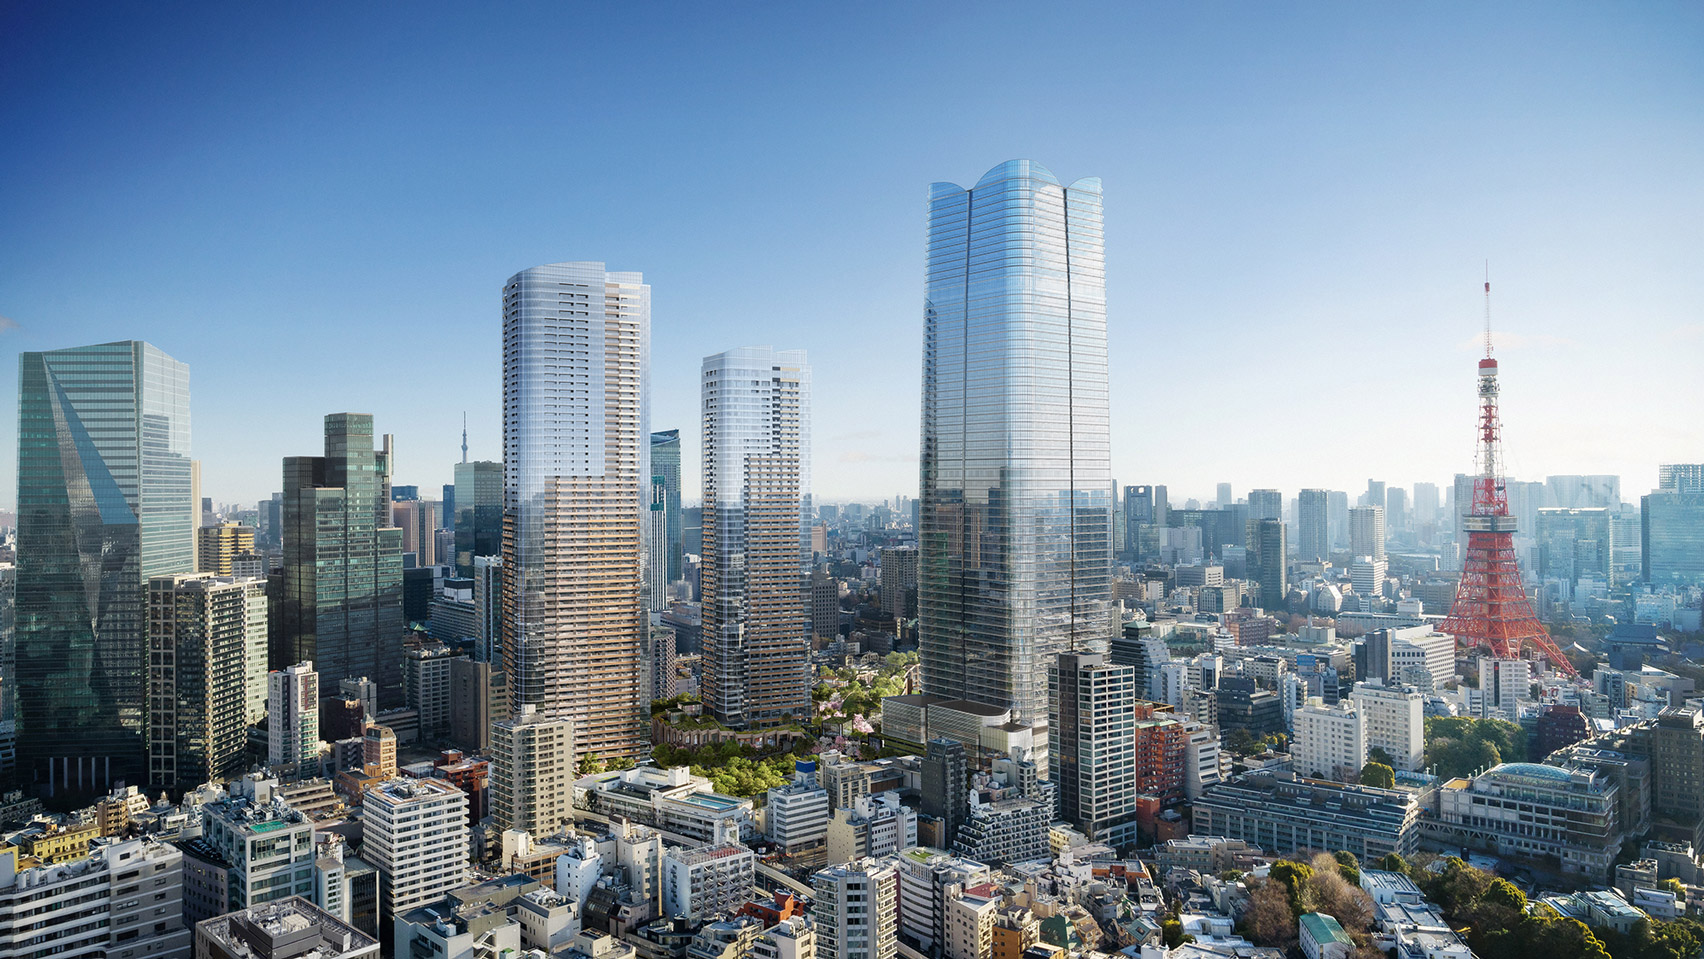 Render of the Tokyo skyline with the A District tower